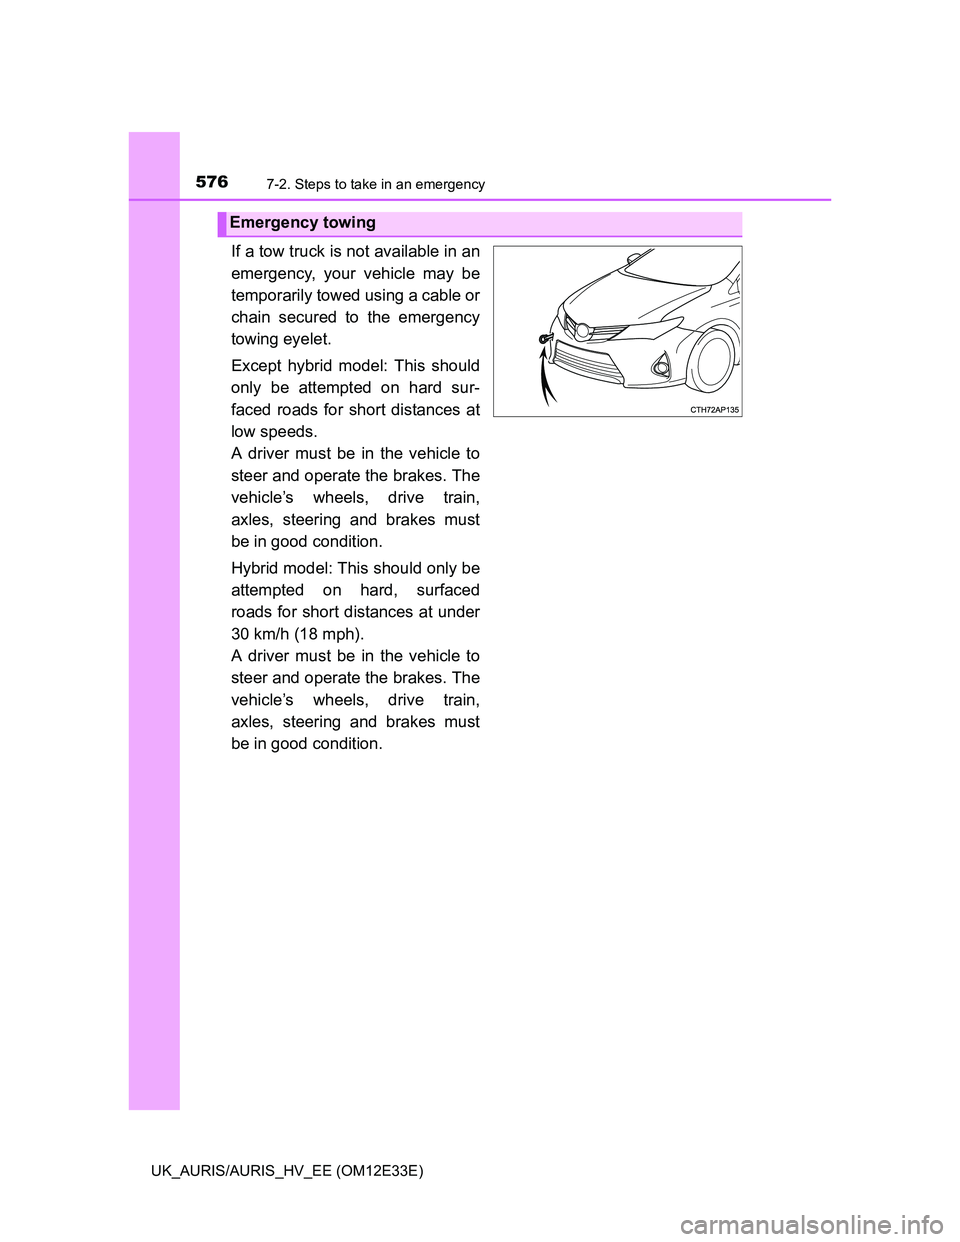 TOYOTA AURIS 2012  Owners Manual (in English) 5767-2. Steps to take in an emergency
UK_AURIS/AURIS_HV_EE (OM12E33E)
If a tow truck is not available in an
emergency, your vehicle may be
temporarily towed using a cable or
chain secured to the emerg